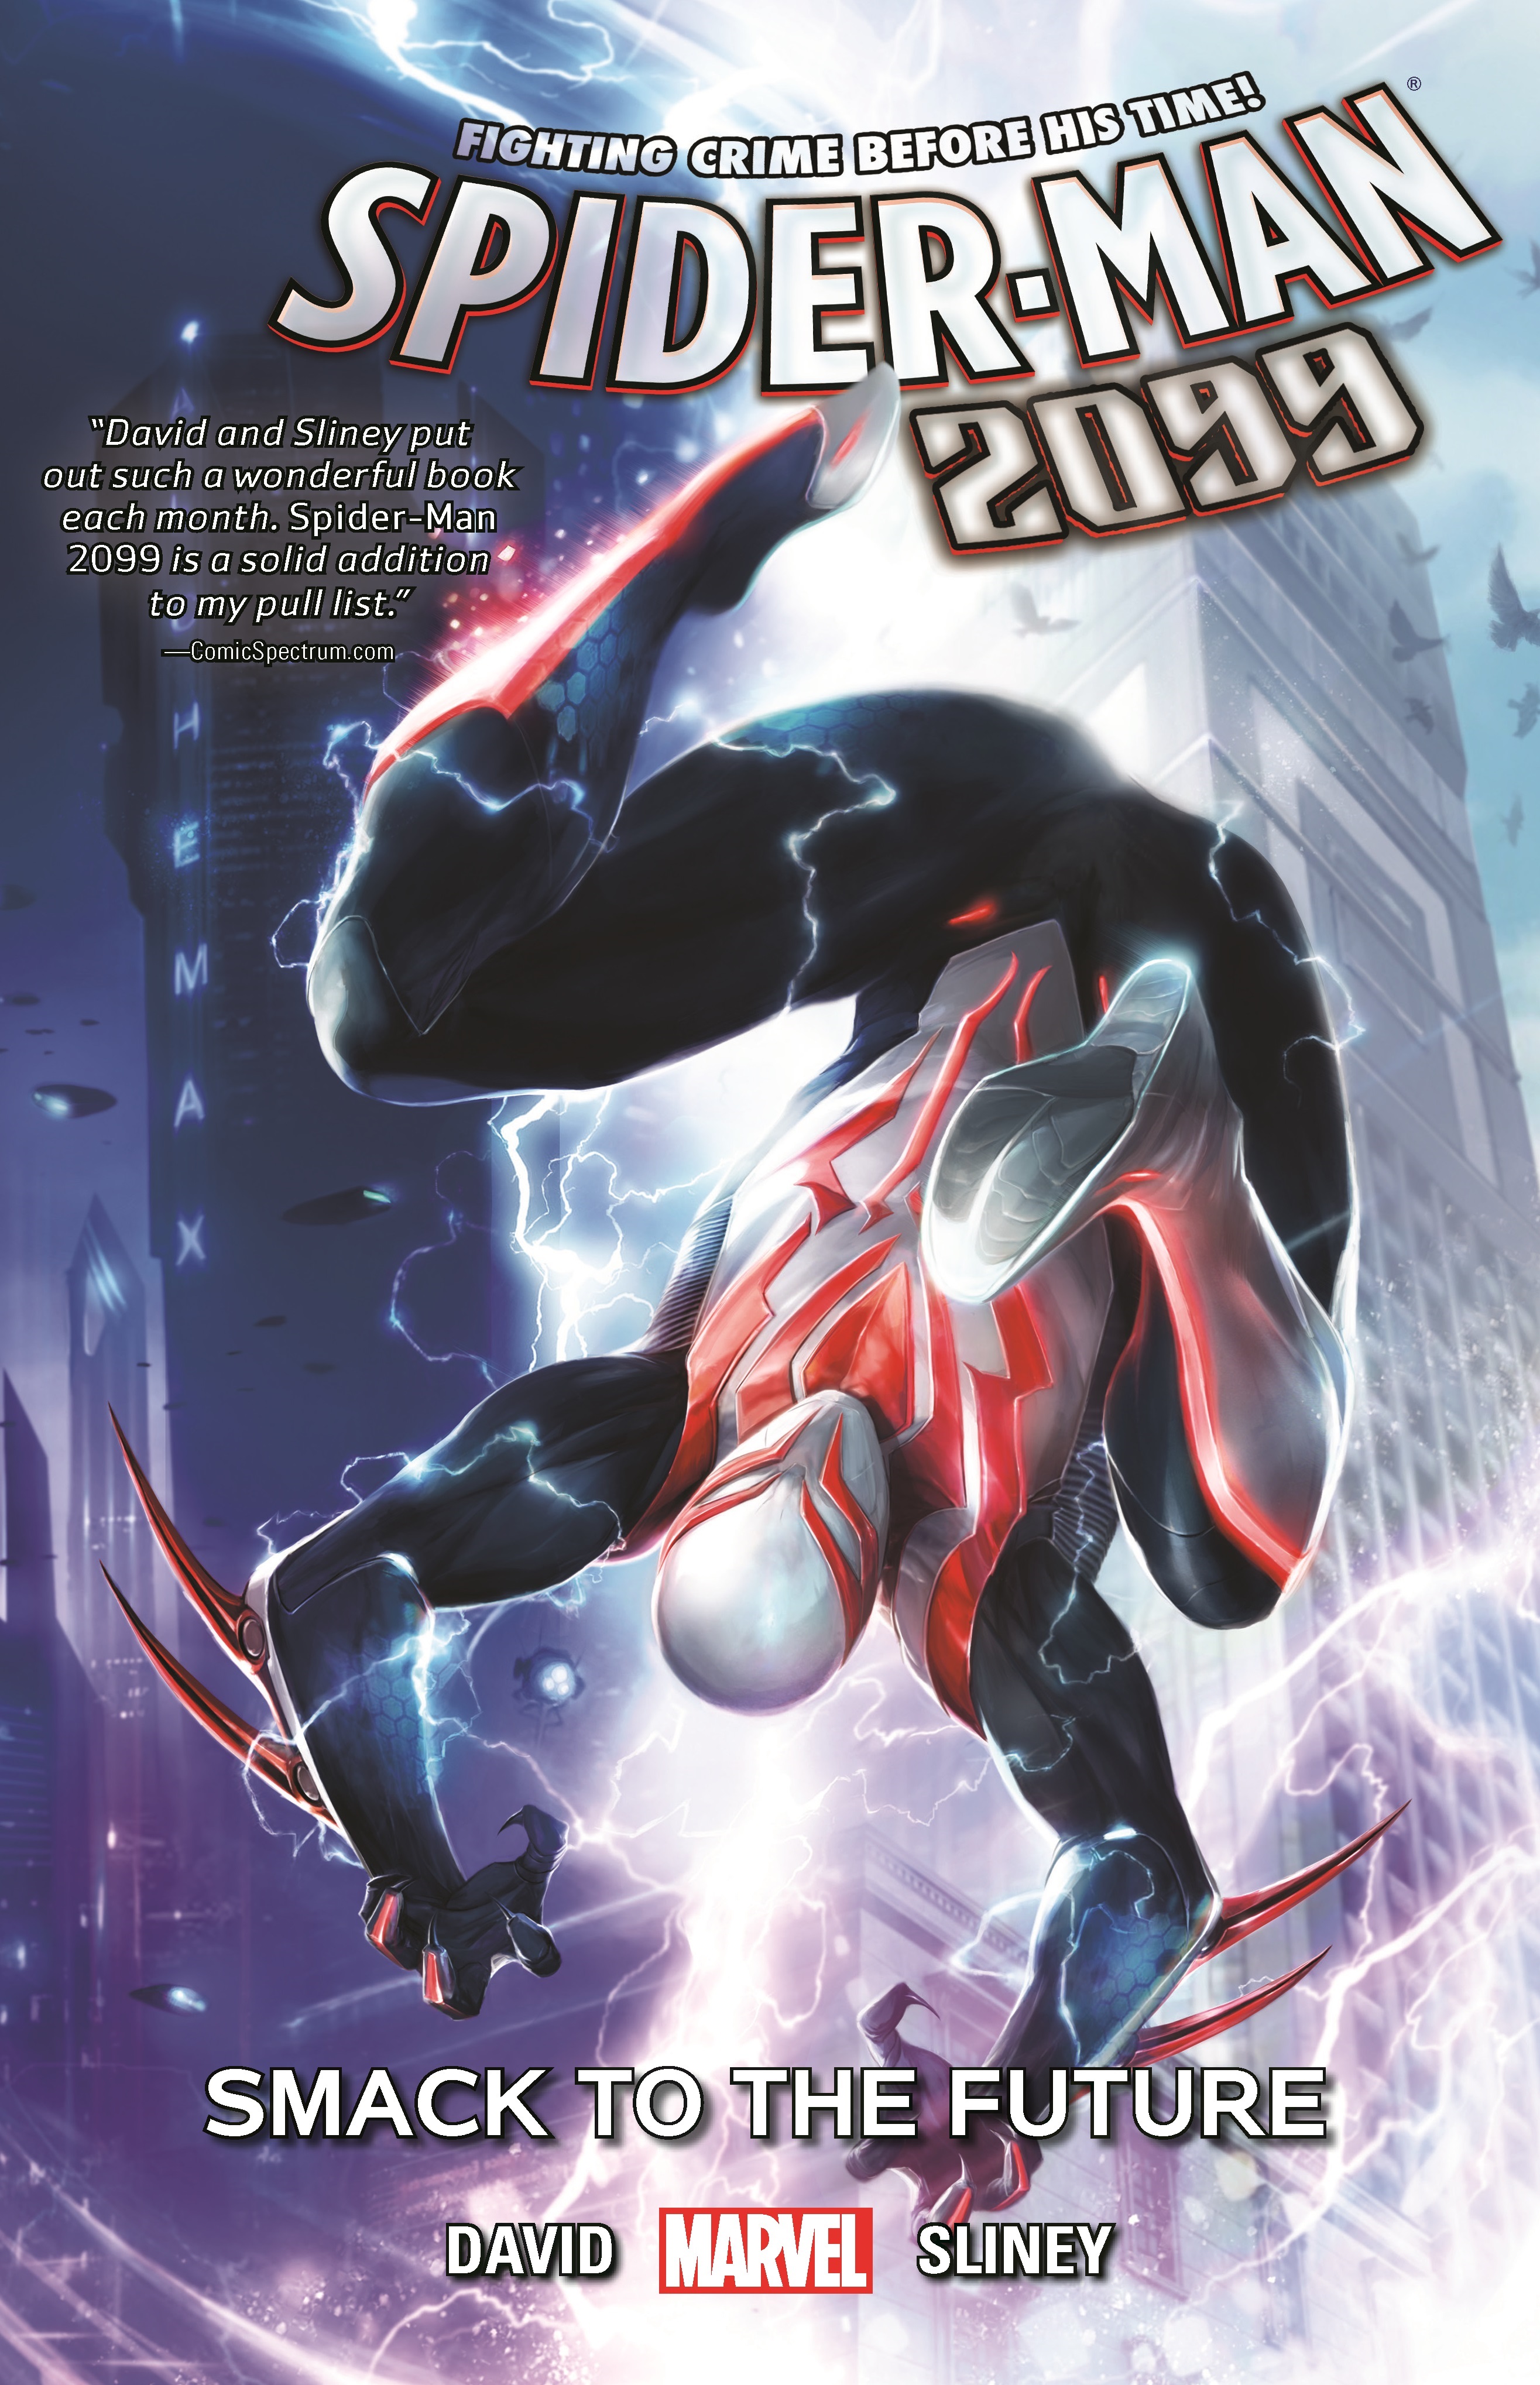 SPIDER-MAN 2099 VOL. 3: SMACK TO THE FUTURE TPB (Trade Paperback)